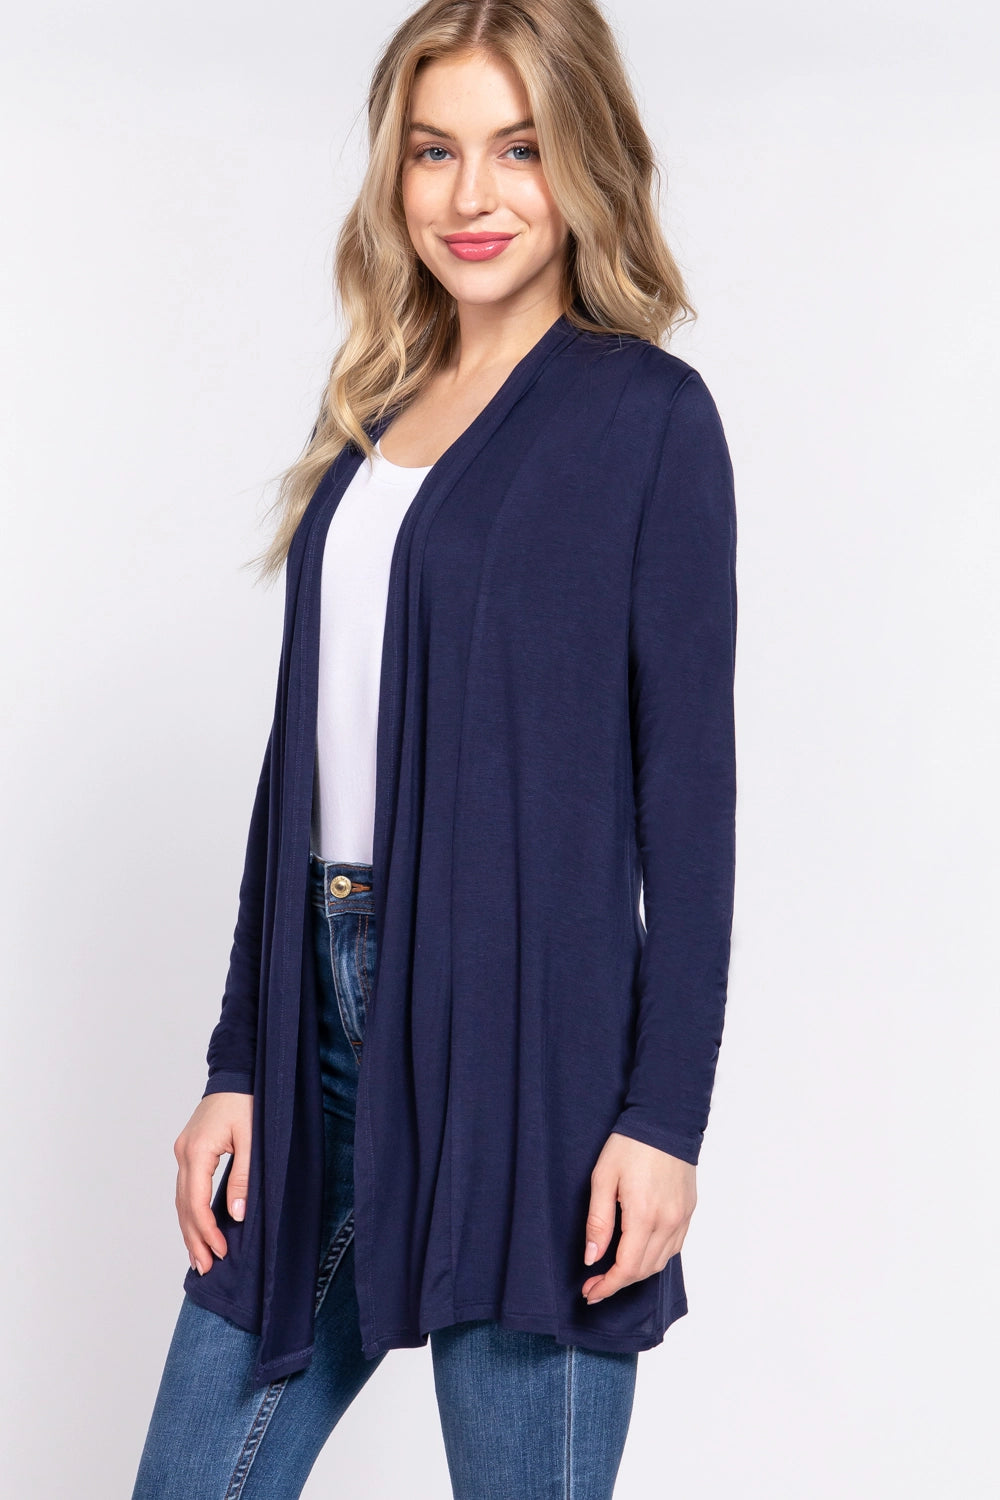 Fitted Long Sleeve Front Open Light Cardigan - Navy